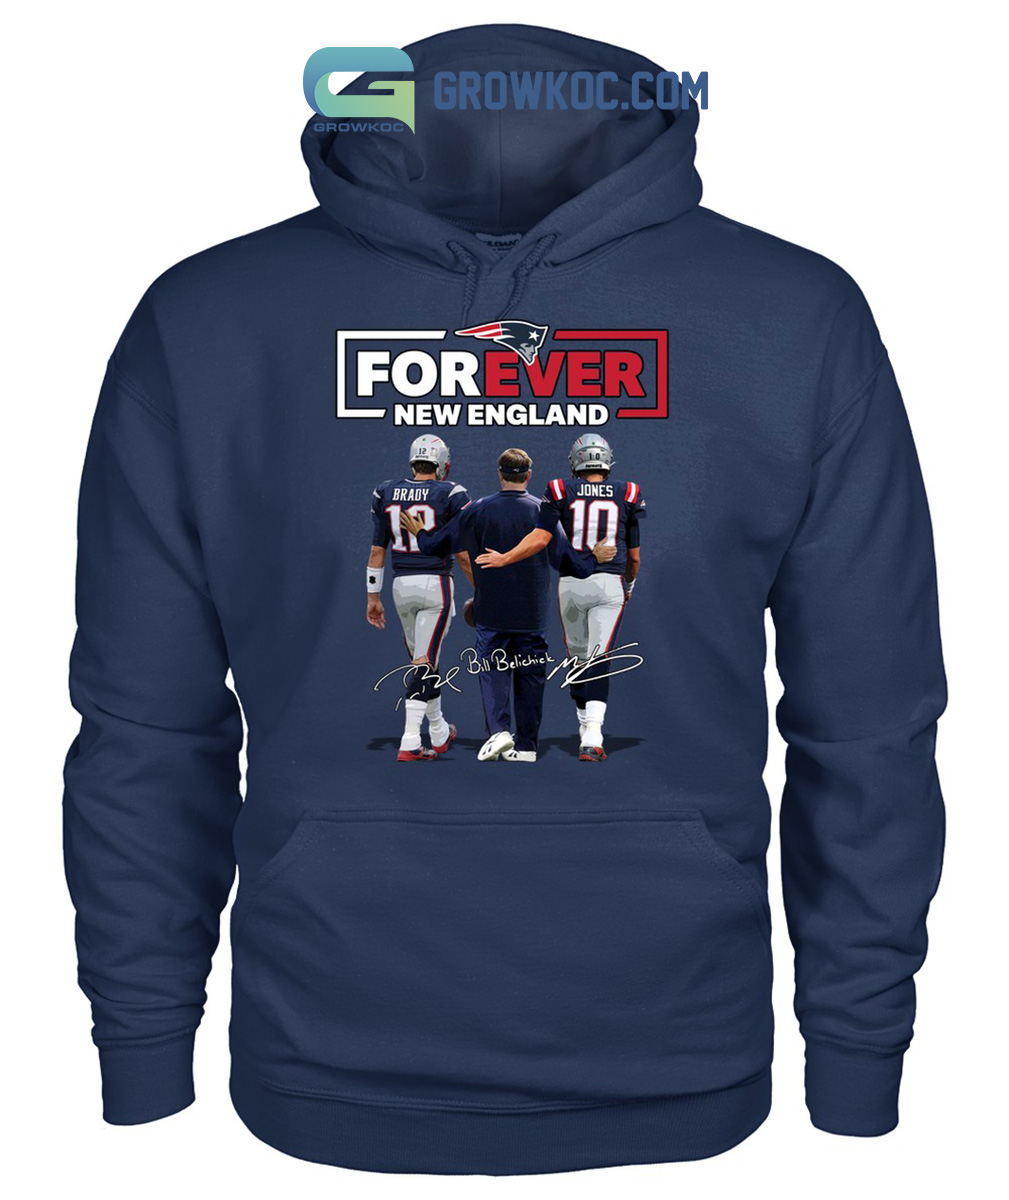 Tom Brady New England Patriots Hockey Style blue and Red pullover hood